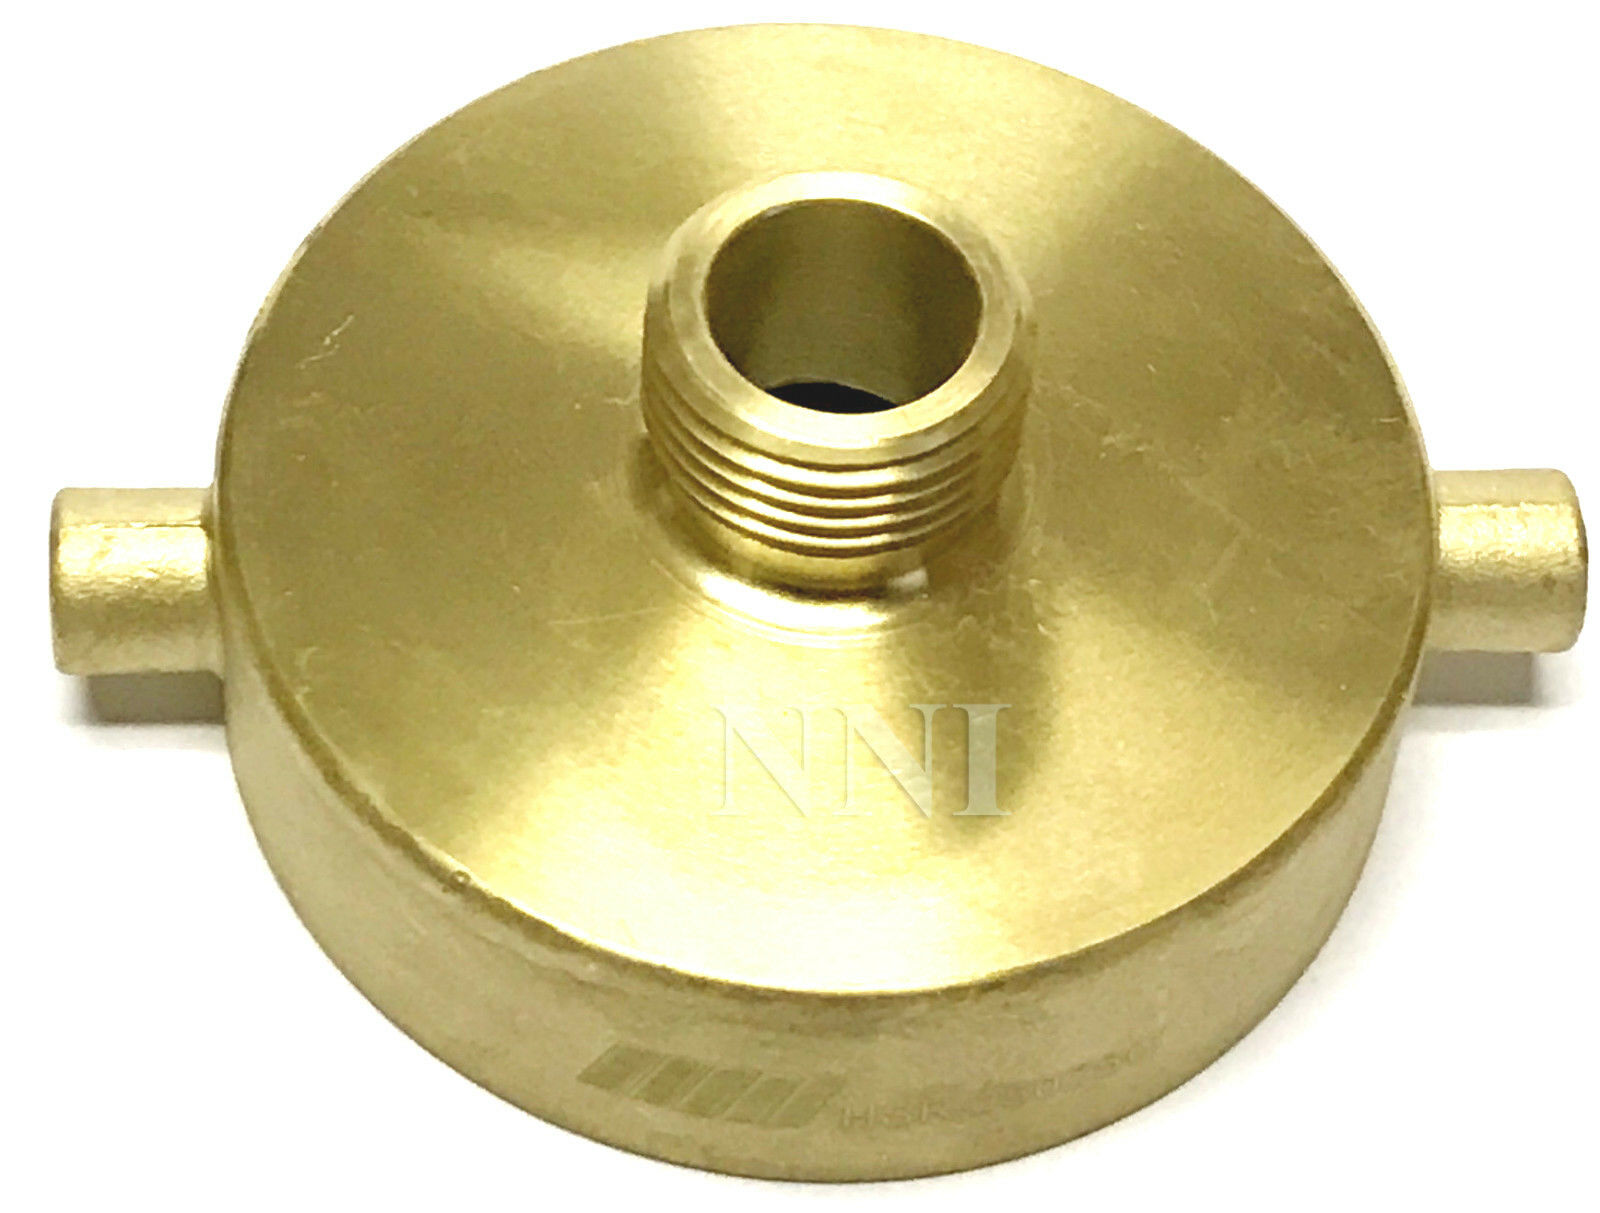 Nni 2-1/2" Female Nst X 3/4" Male Ght Garden Hose, Hydrant Brass Adapter